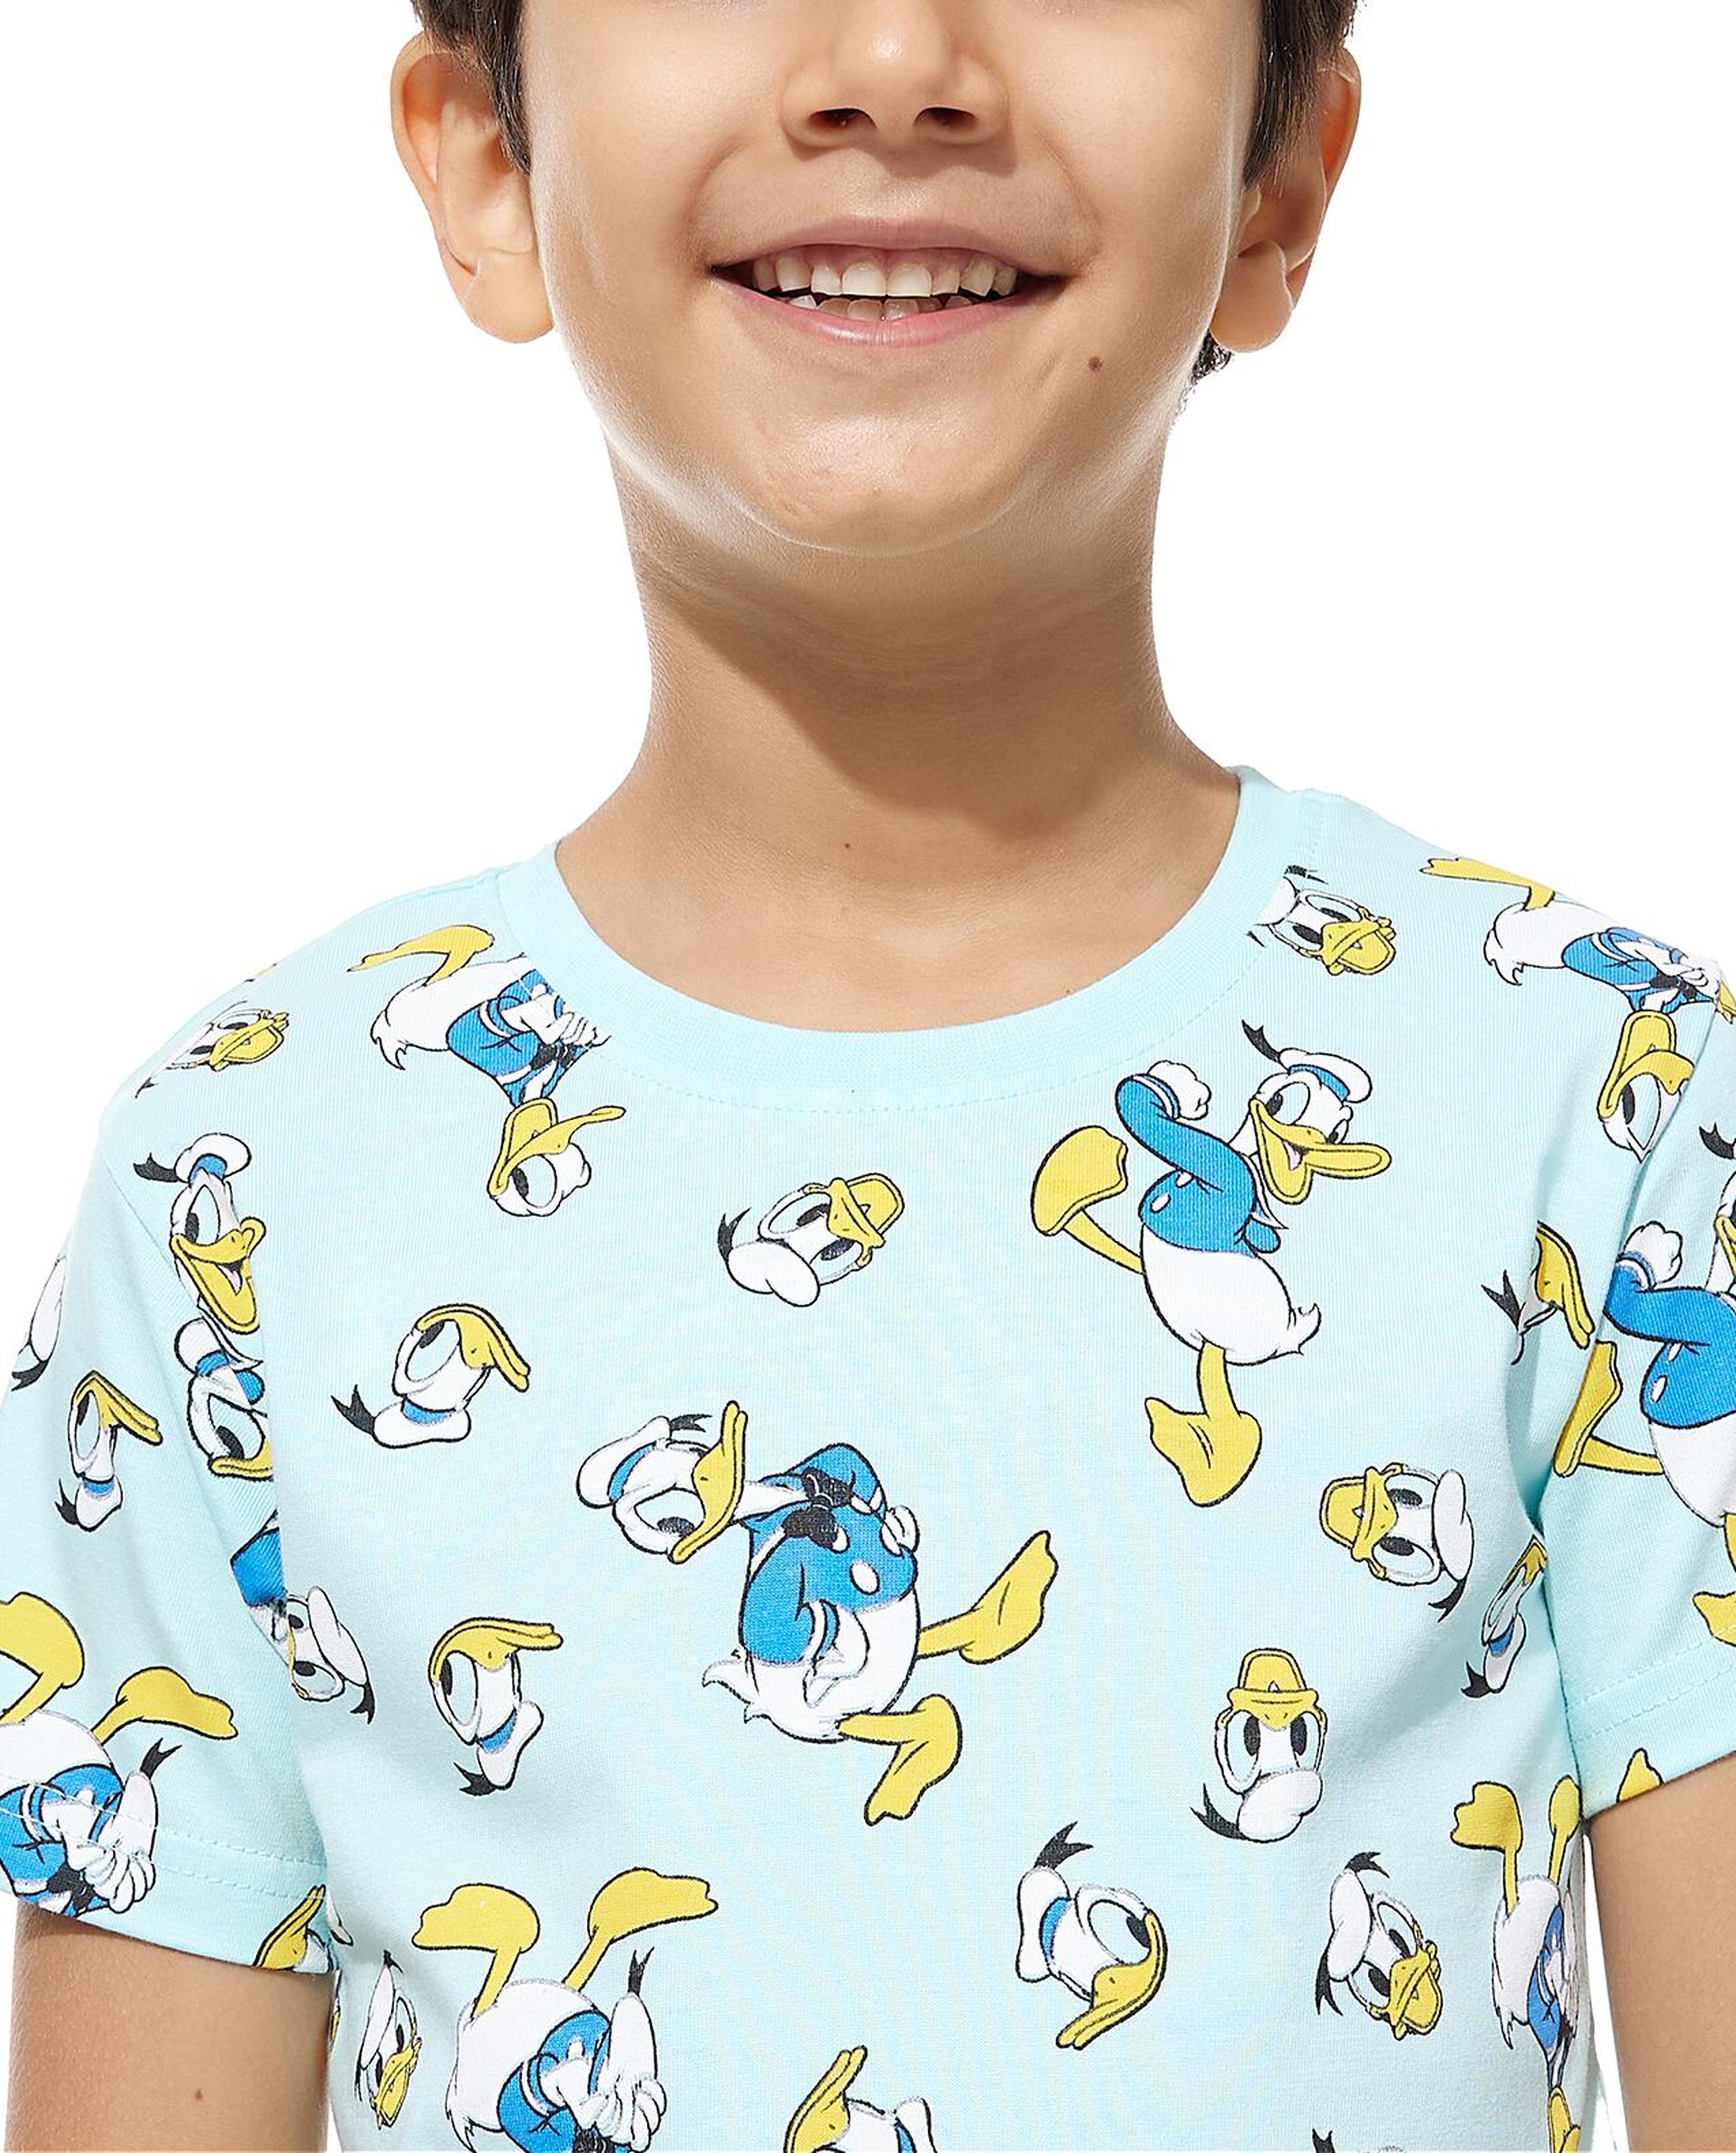 Pack of 2 Donald Duck Print T-Shirts with Short Sleeves